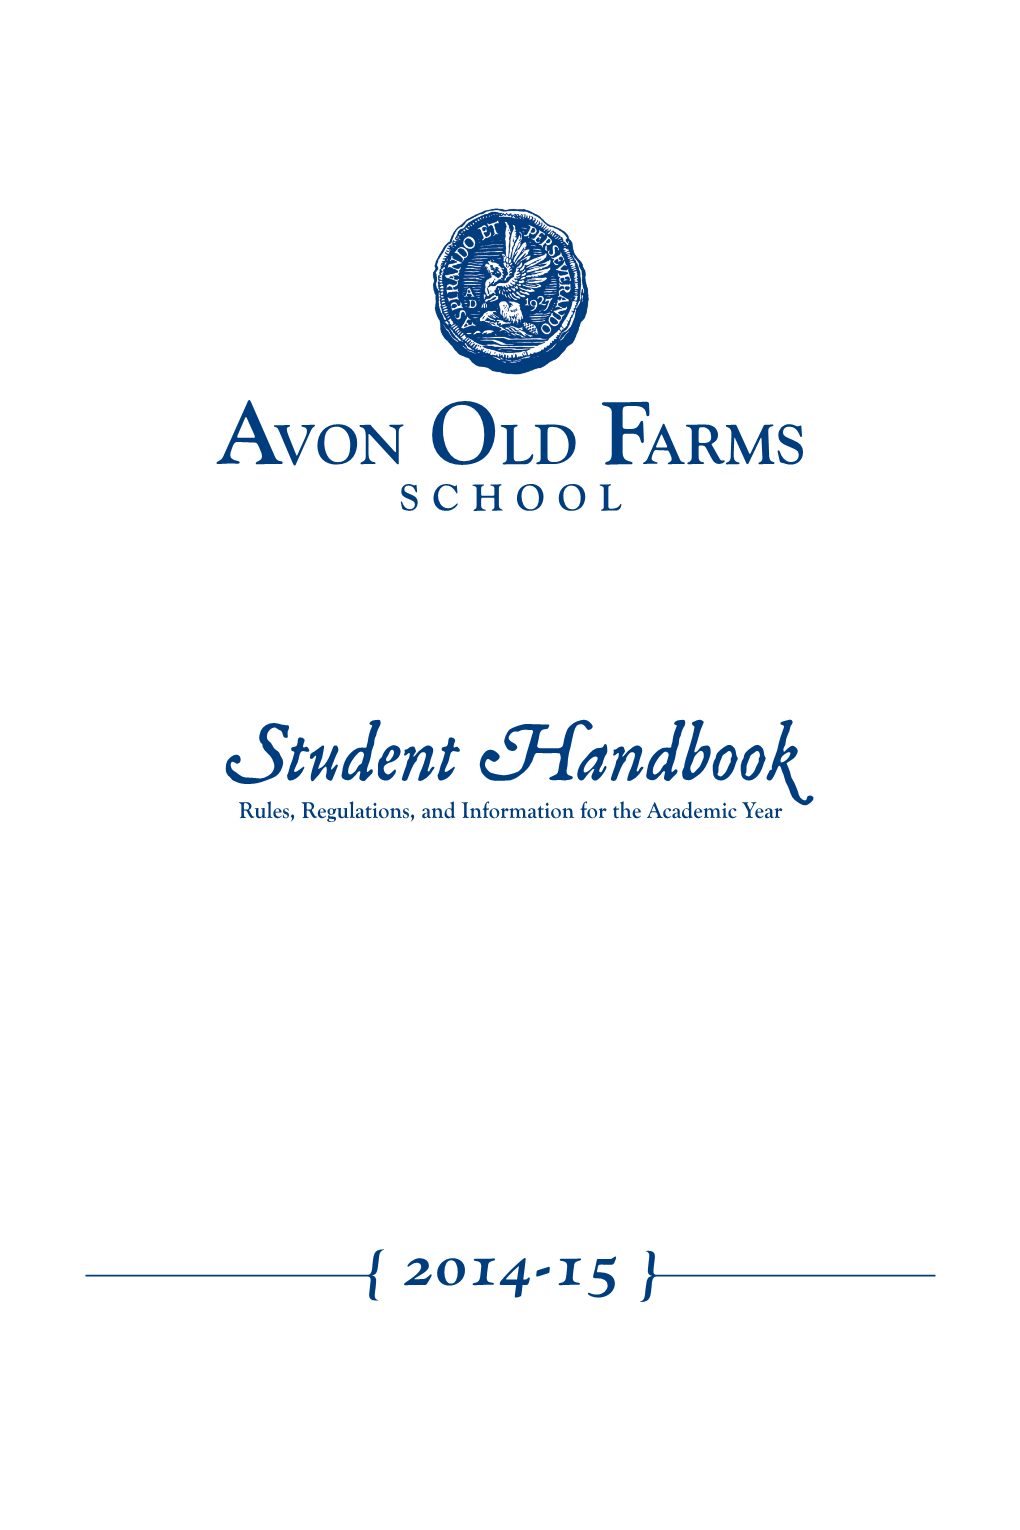 Student Handbook Rules, Regulations, and Information for the Academic Year